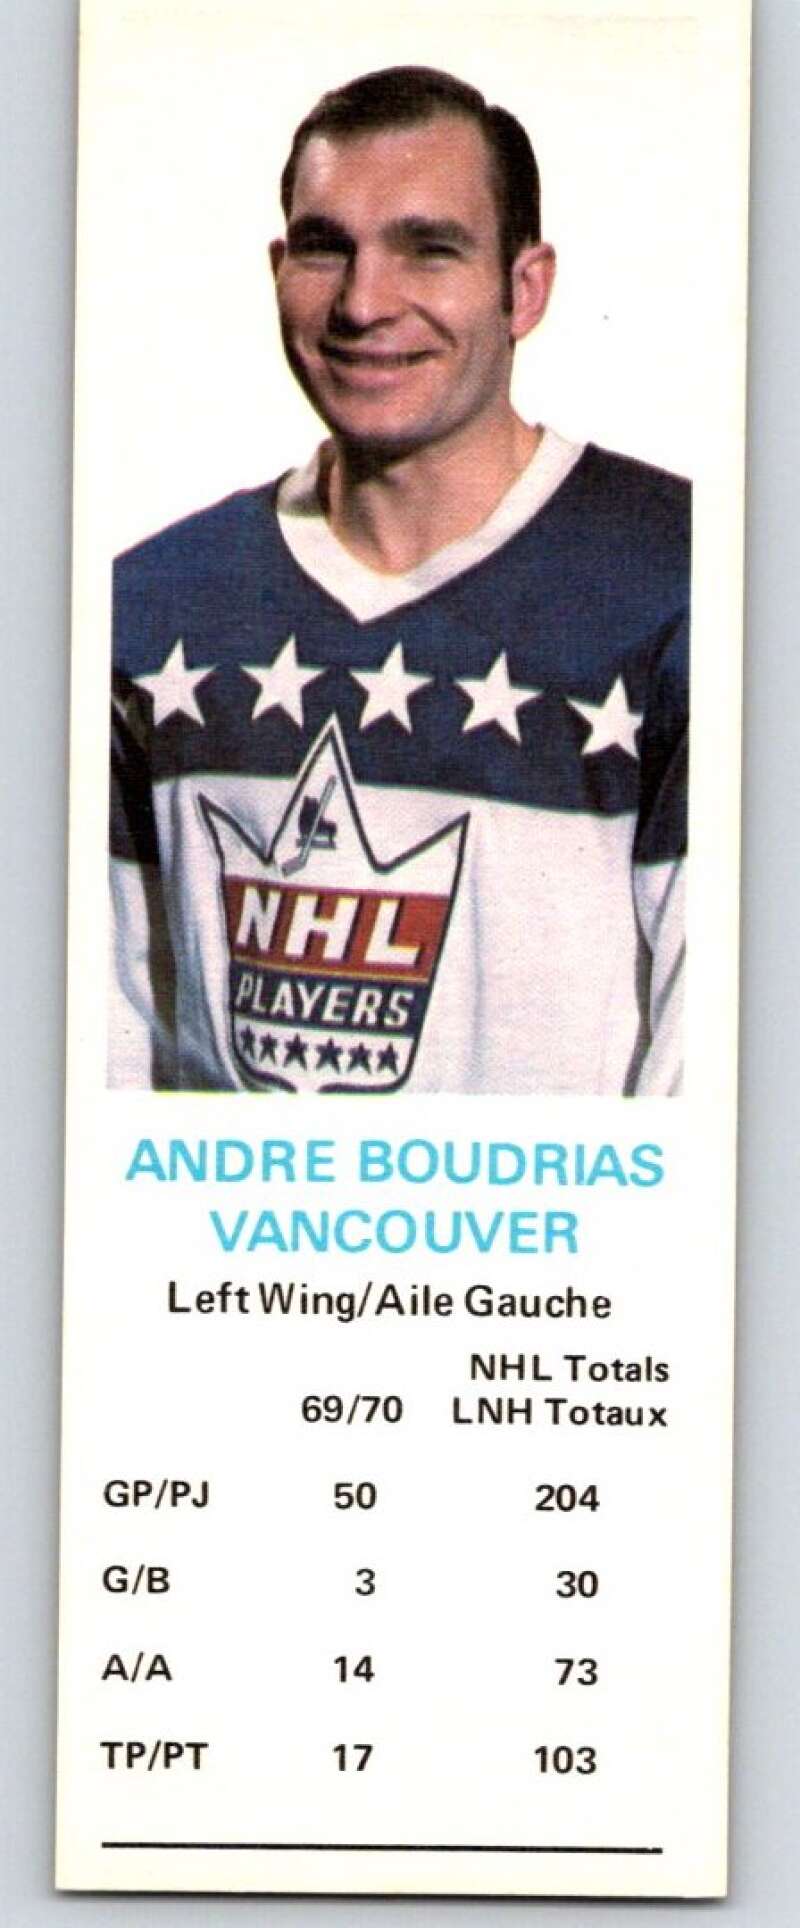 1970-71 Dad's Cookies #8 Andre Boudrias  Vancouver Canucks  X200